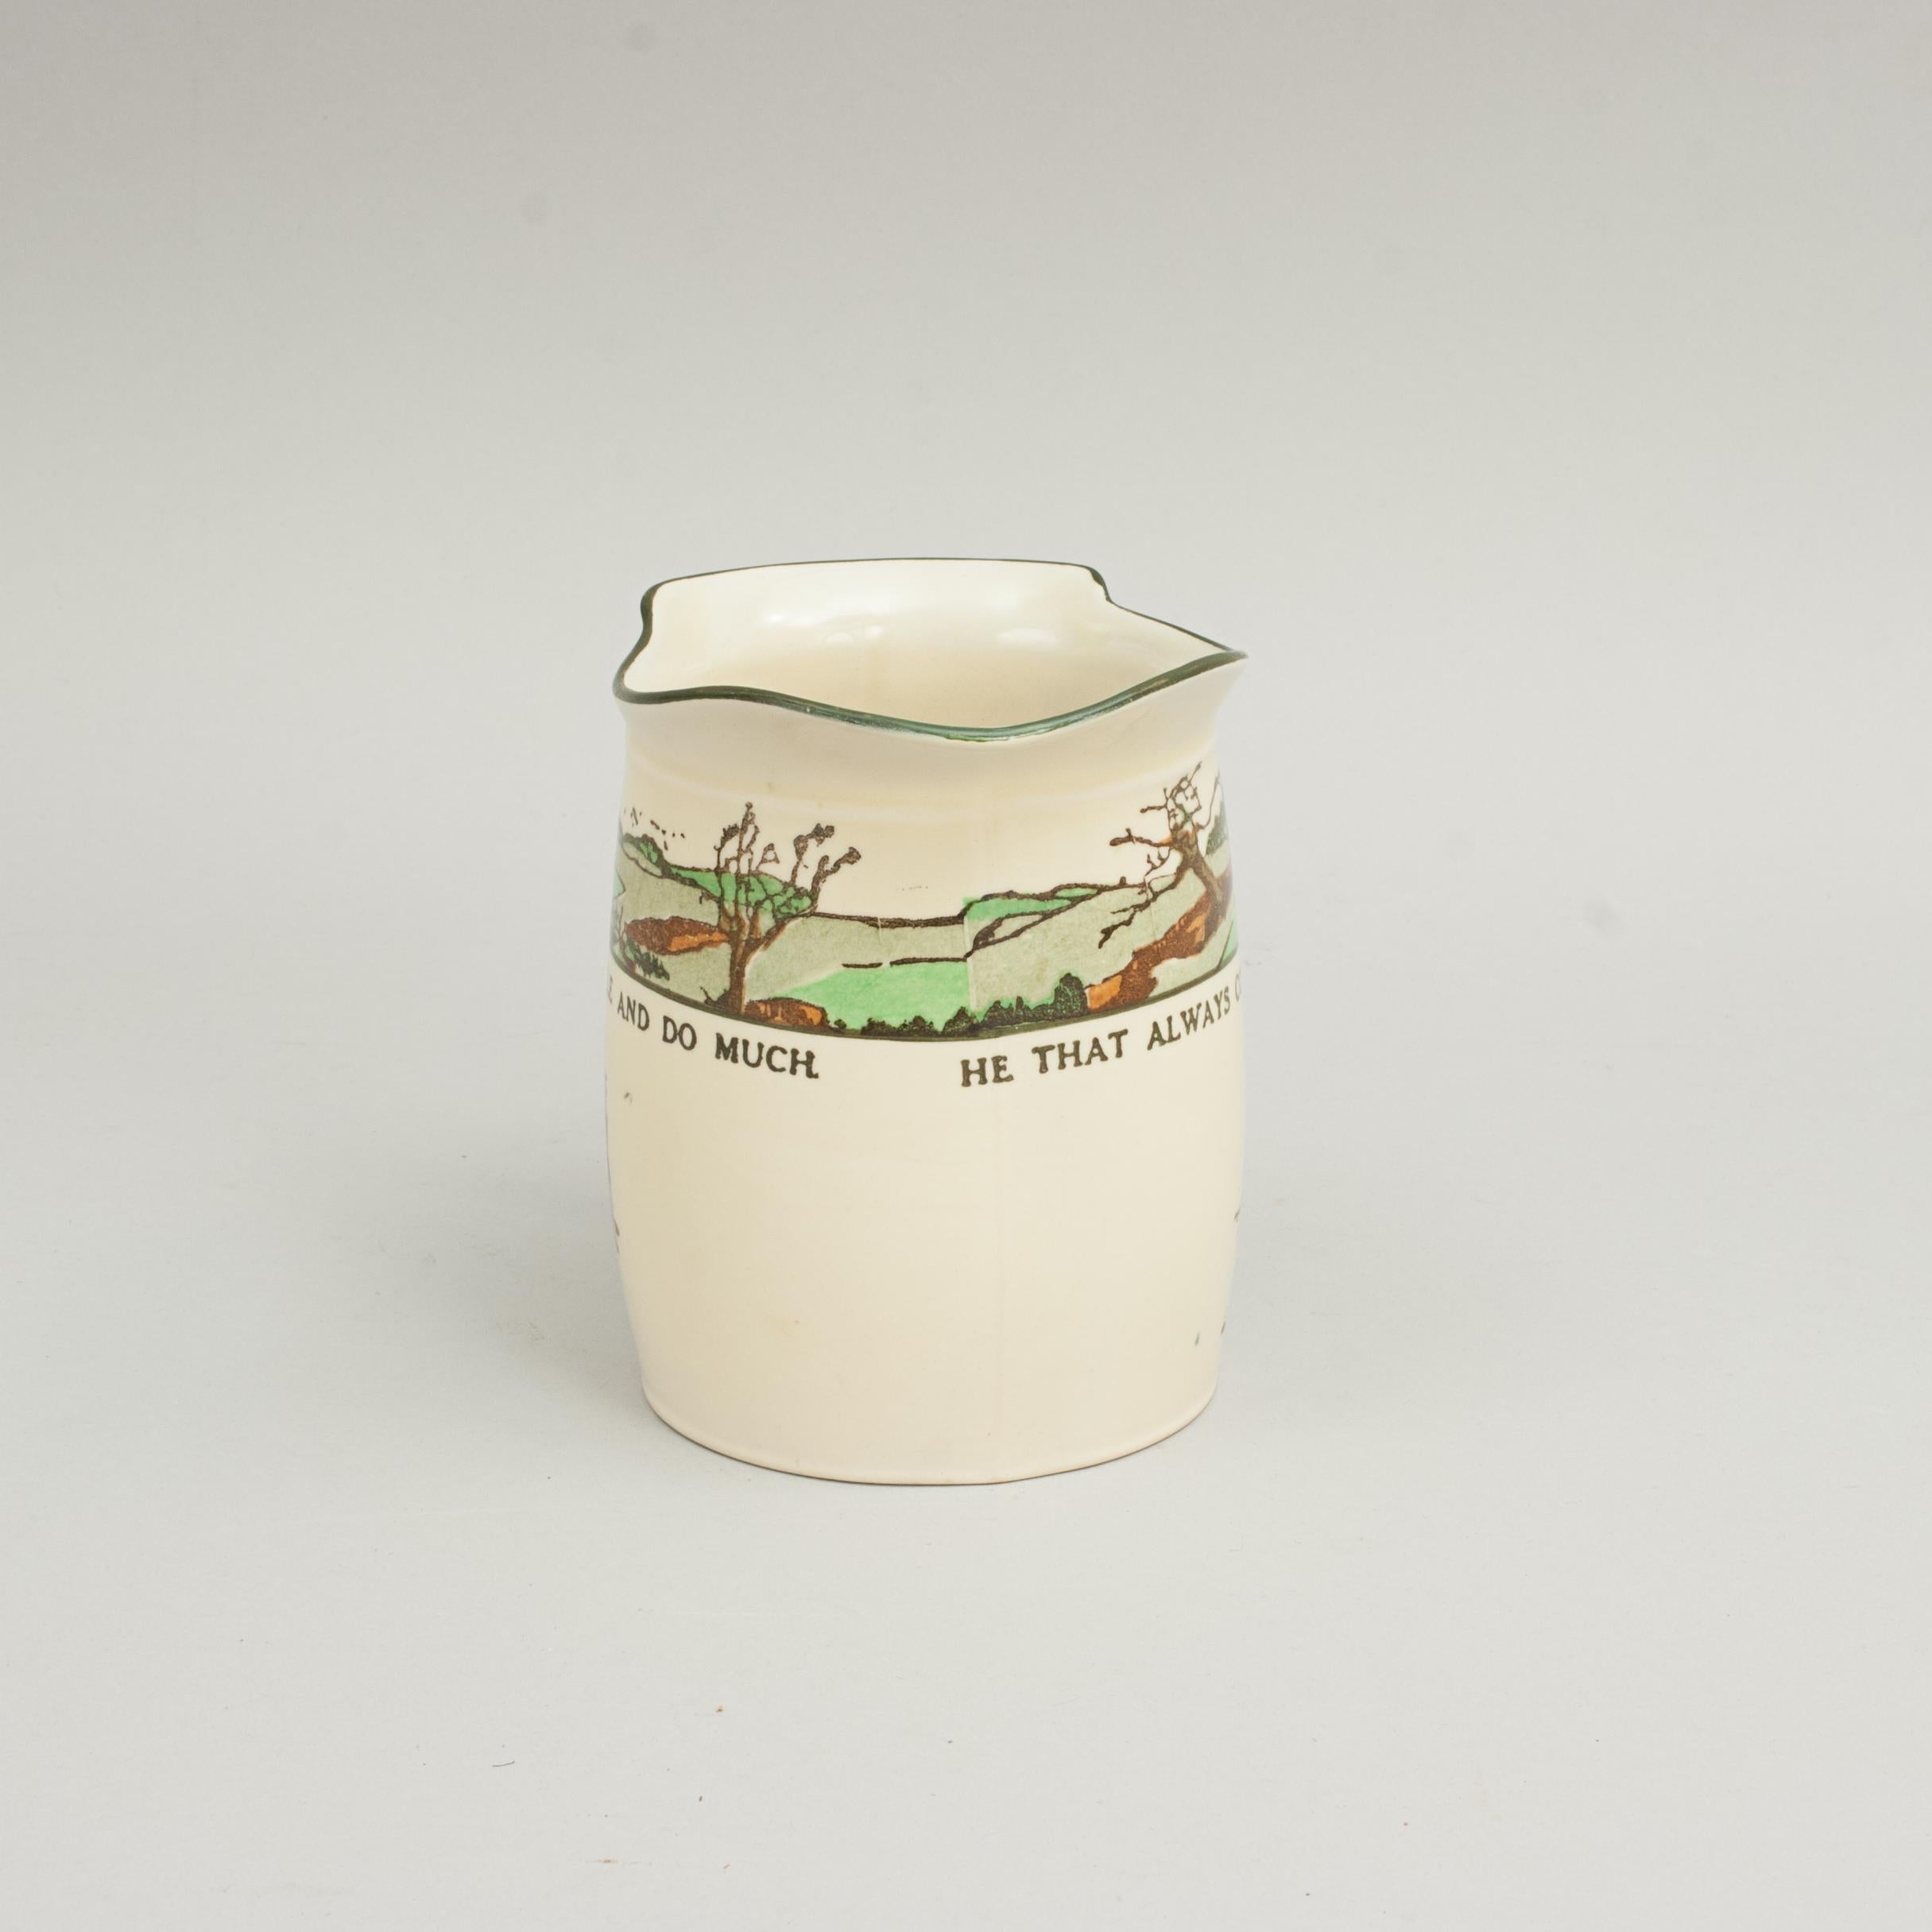 Royal Doulton series ware golf jug.
Royal Doulton jug with polychrome golf scene and the proverb, 